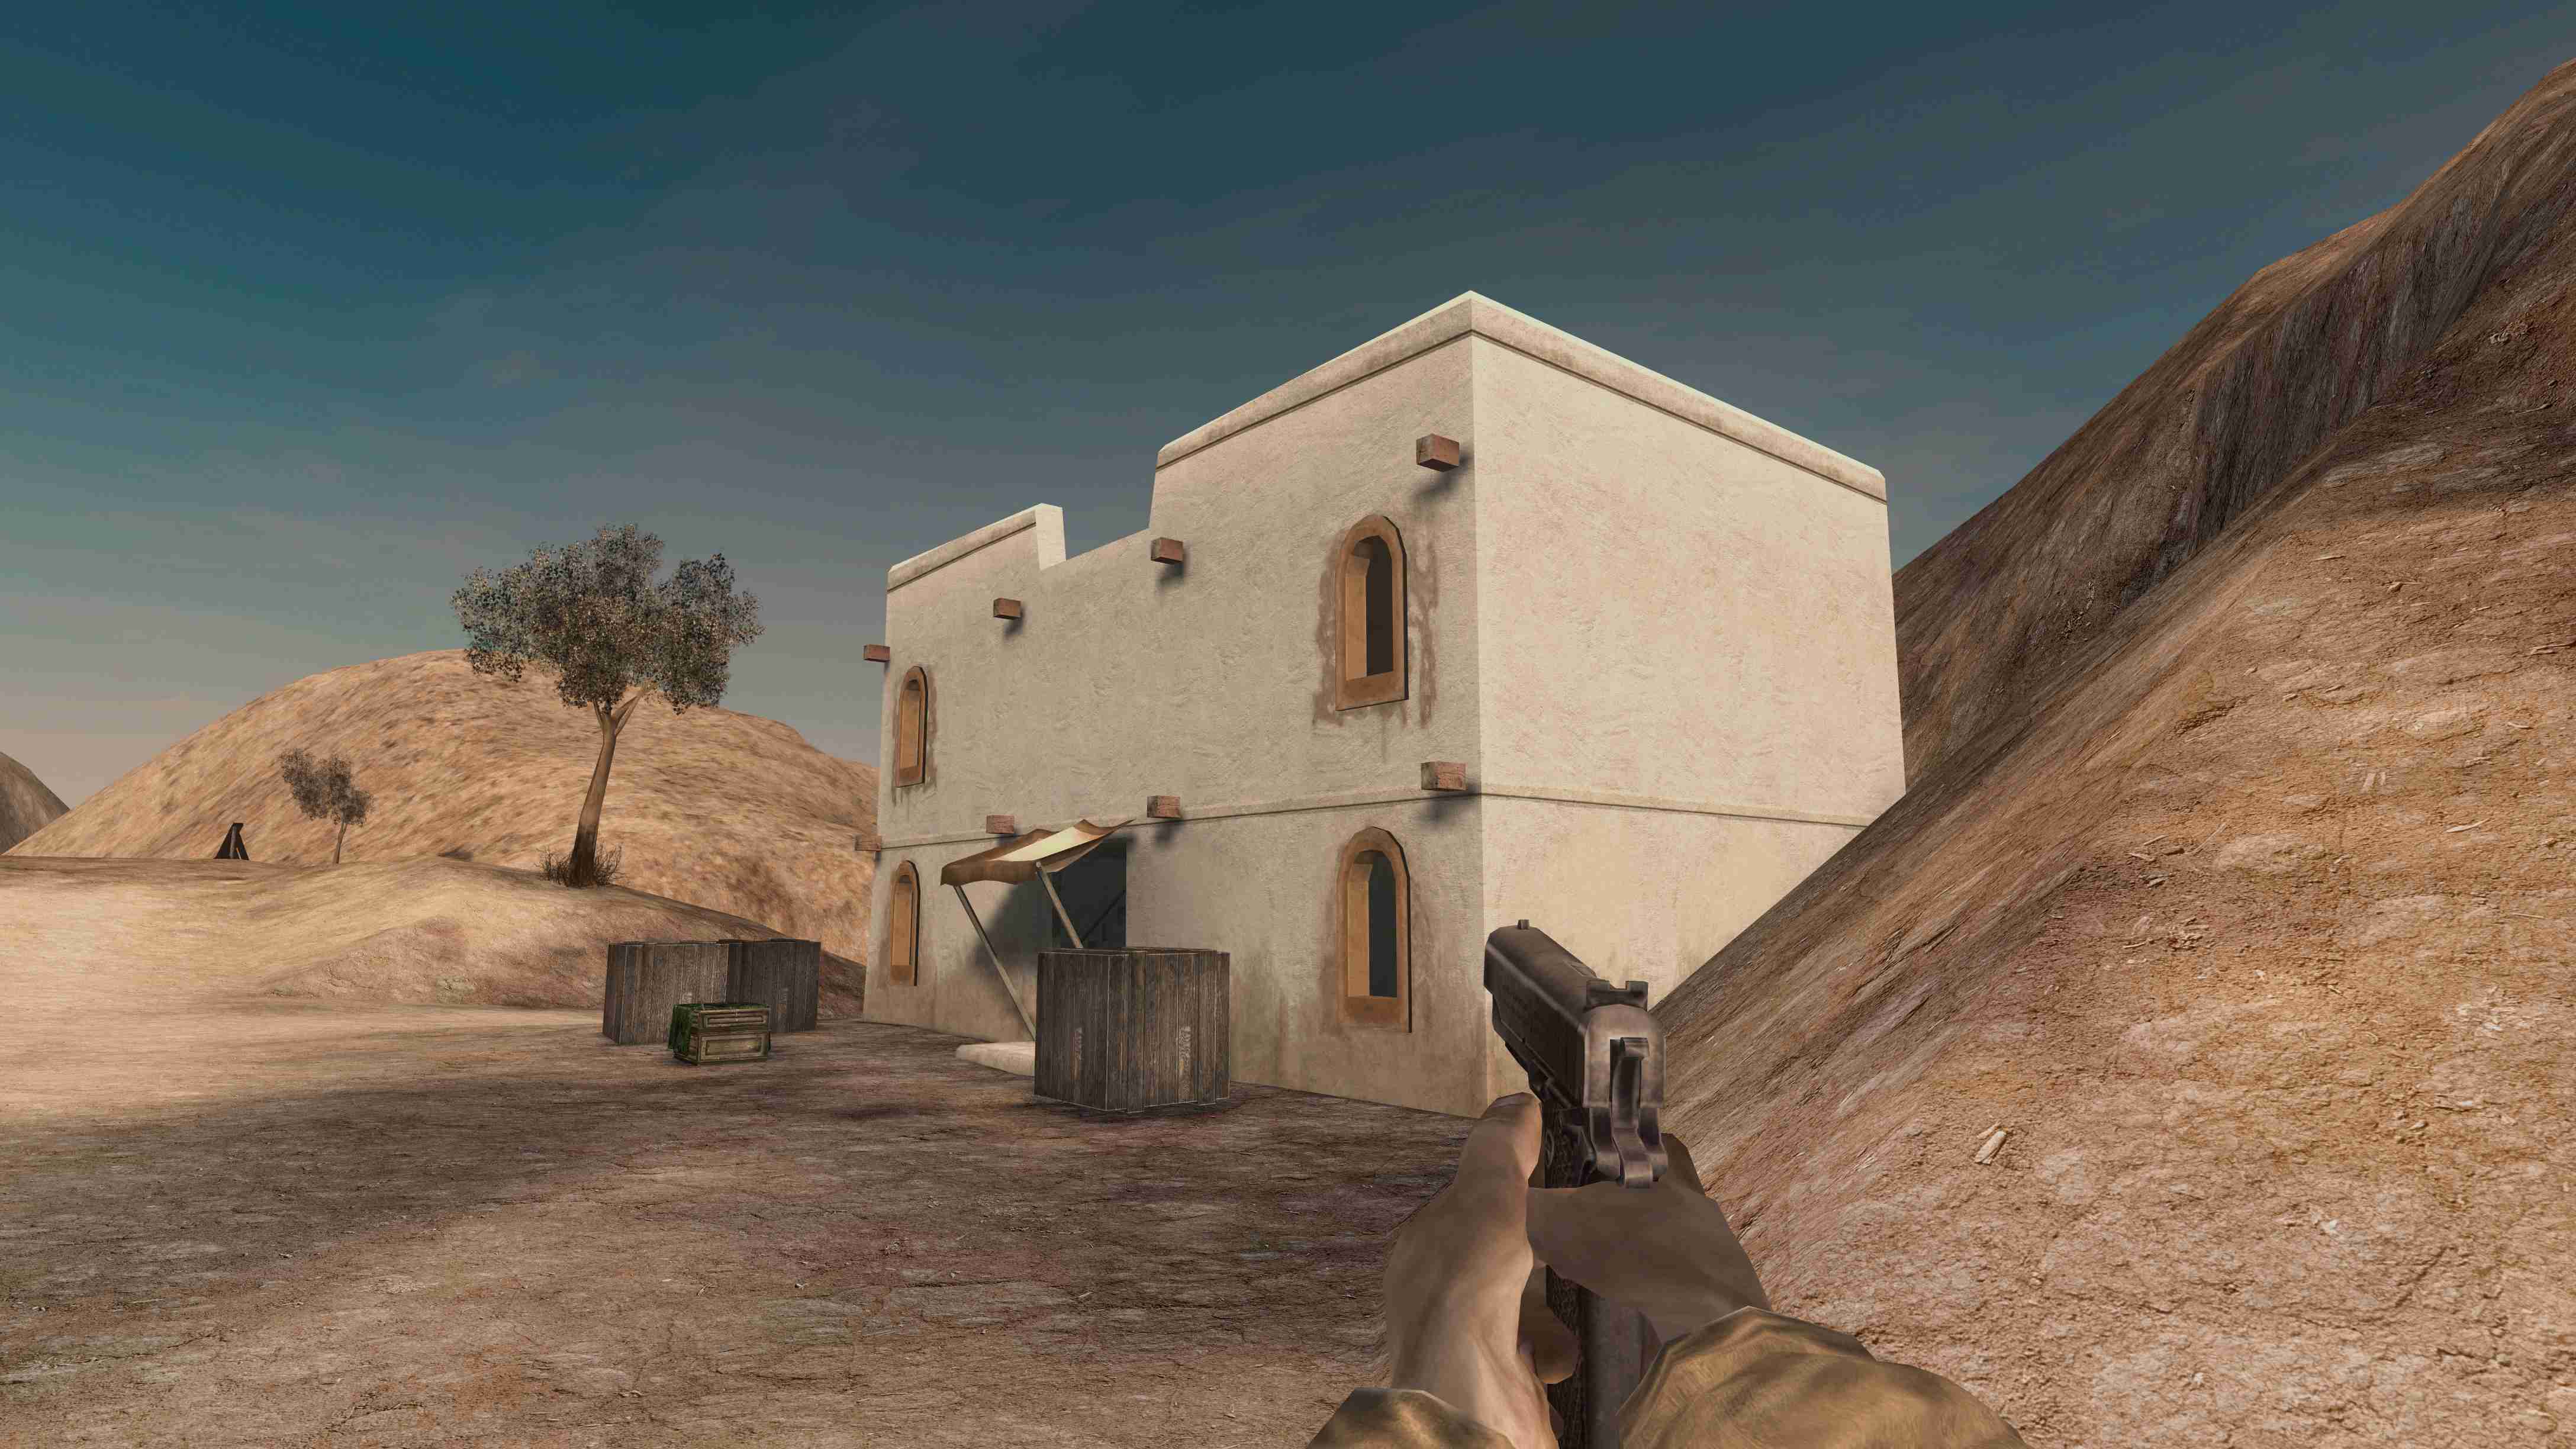 Player looking at a white stone house in desert terrain.